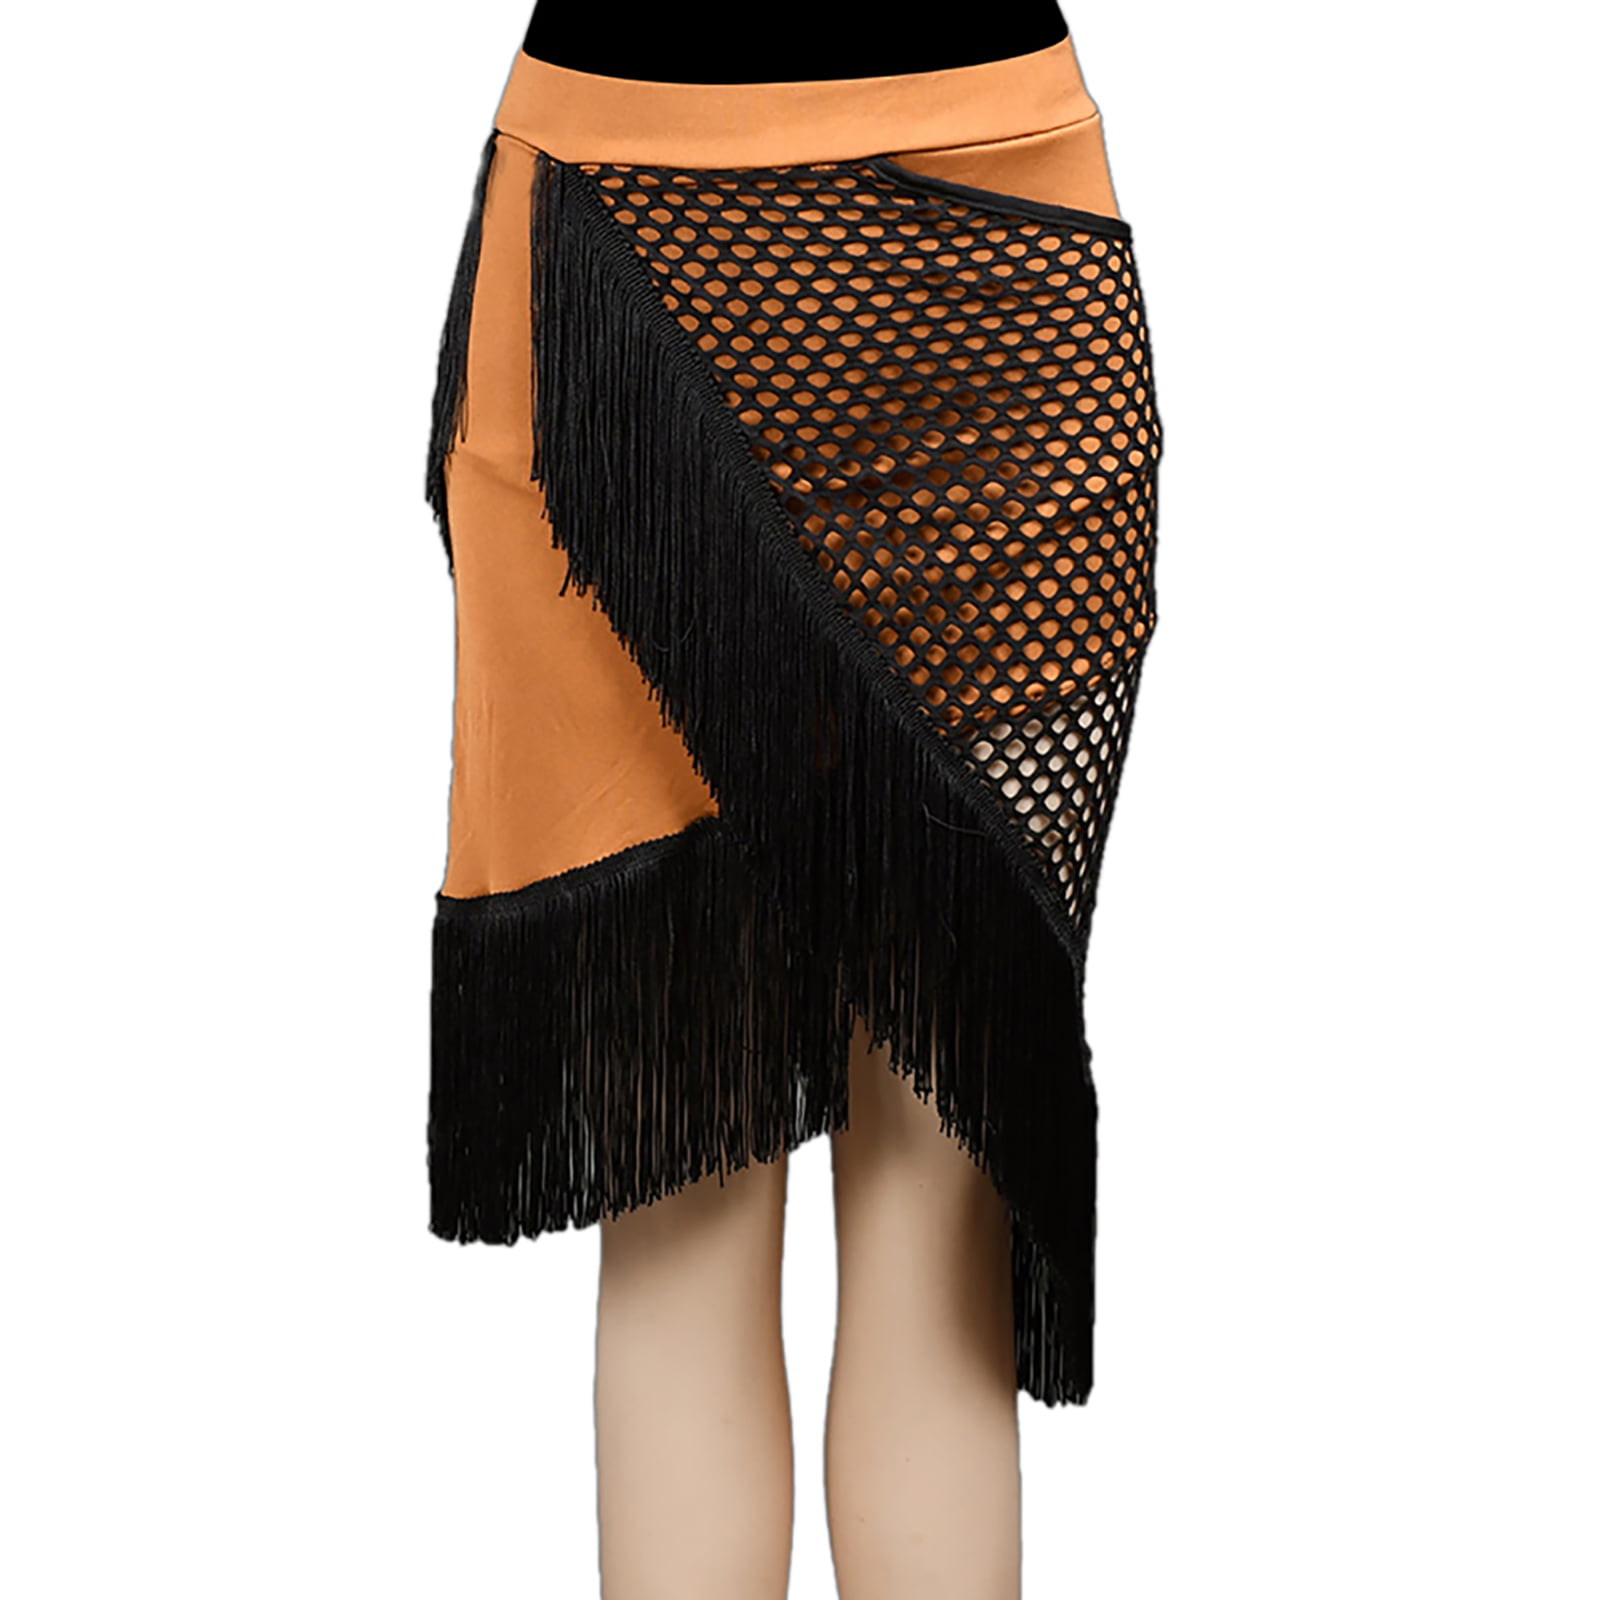 Iride - skirt for Argentine tango. Gantlé - online store with clothes for  dance.